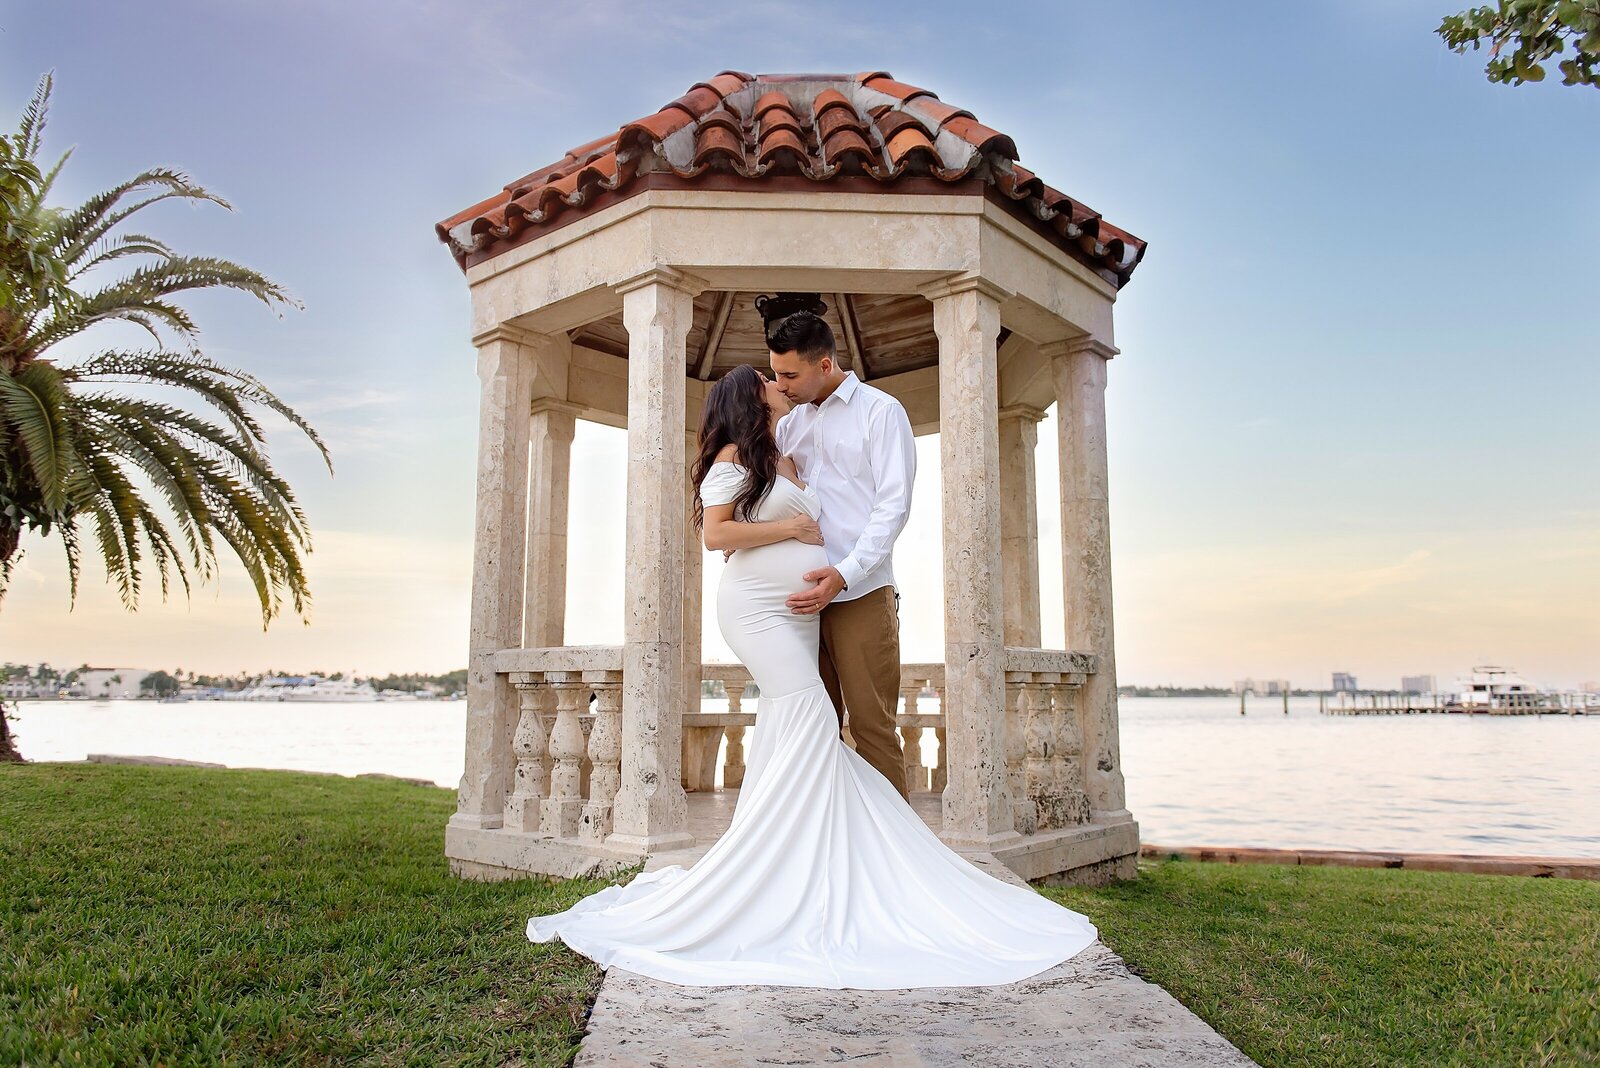 Maternity photographer captures couple at sunset in gazebo at Bradley Park in Palm Beach, FL.